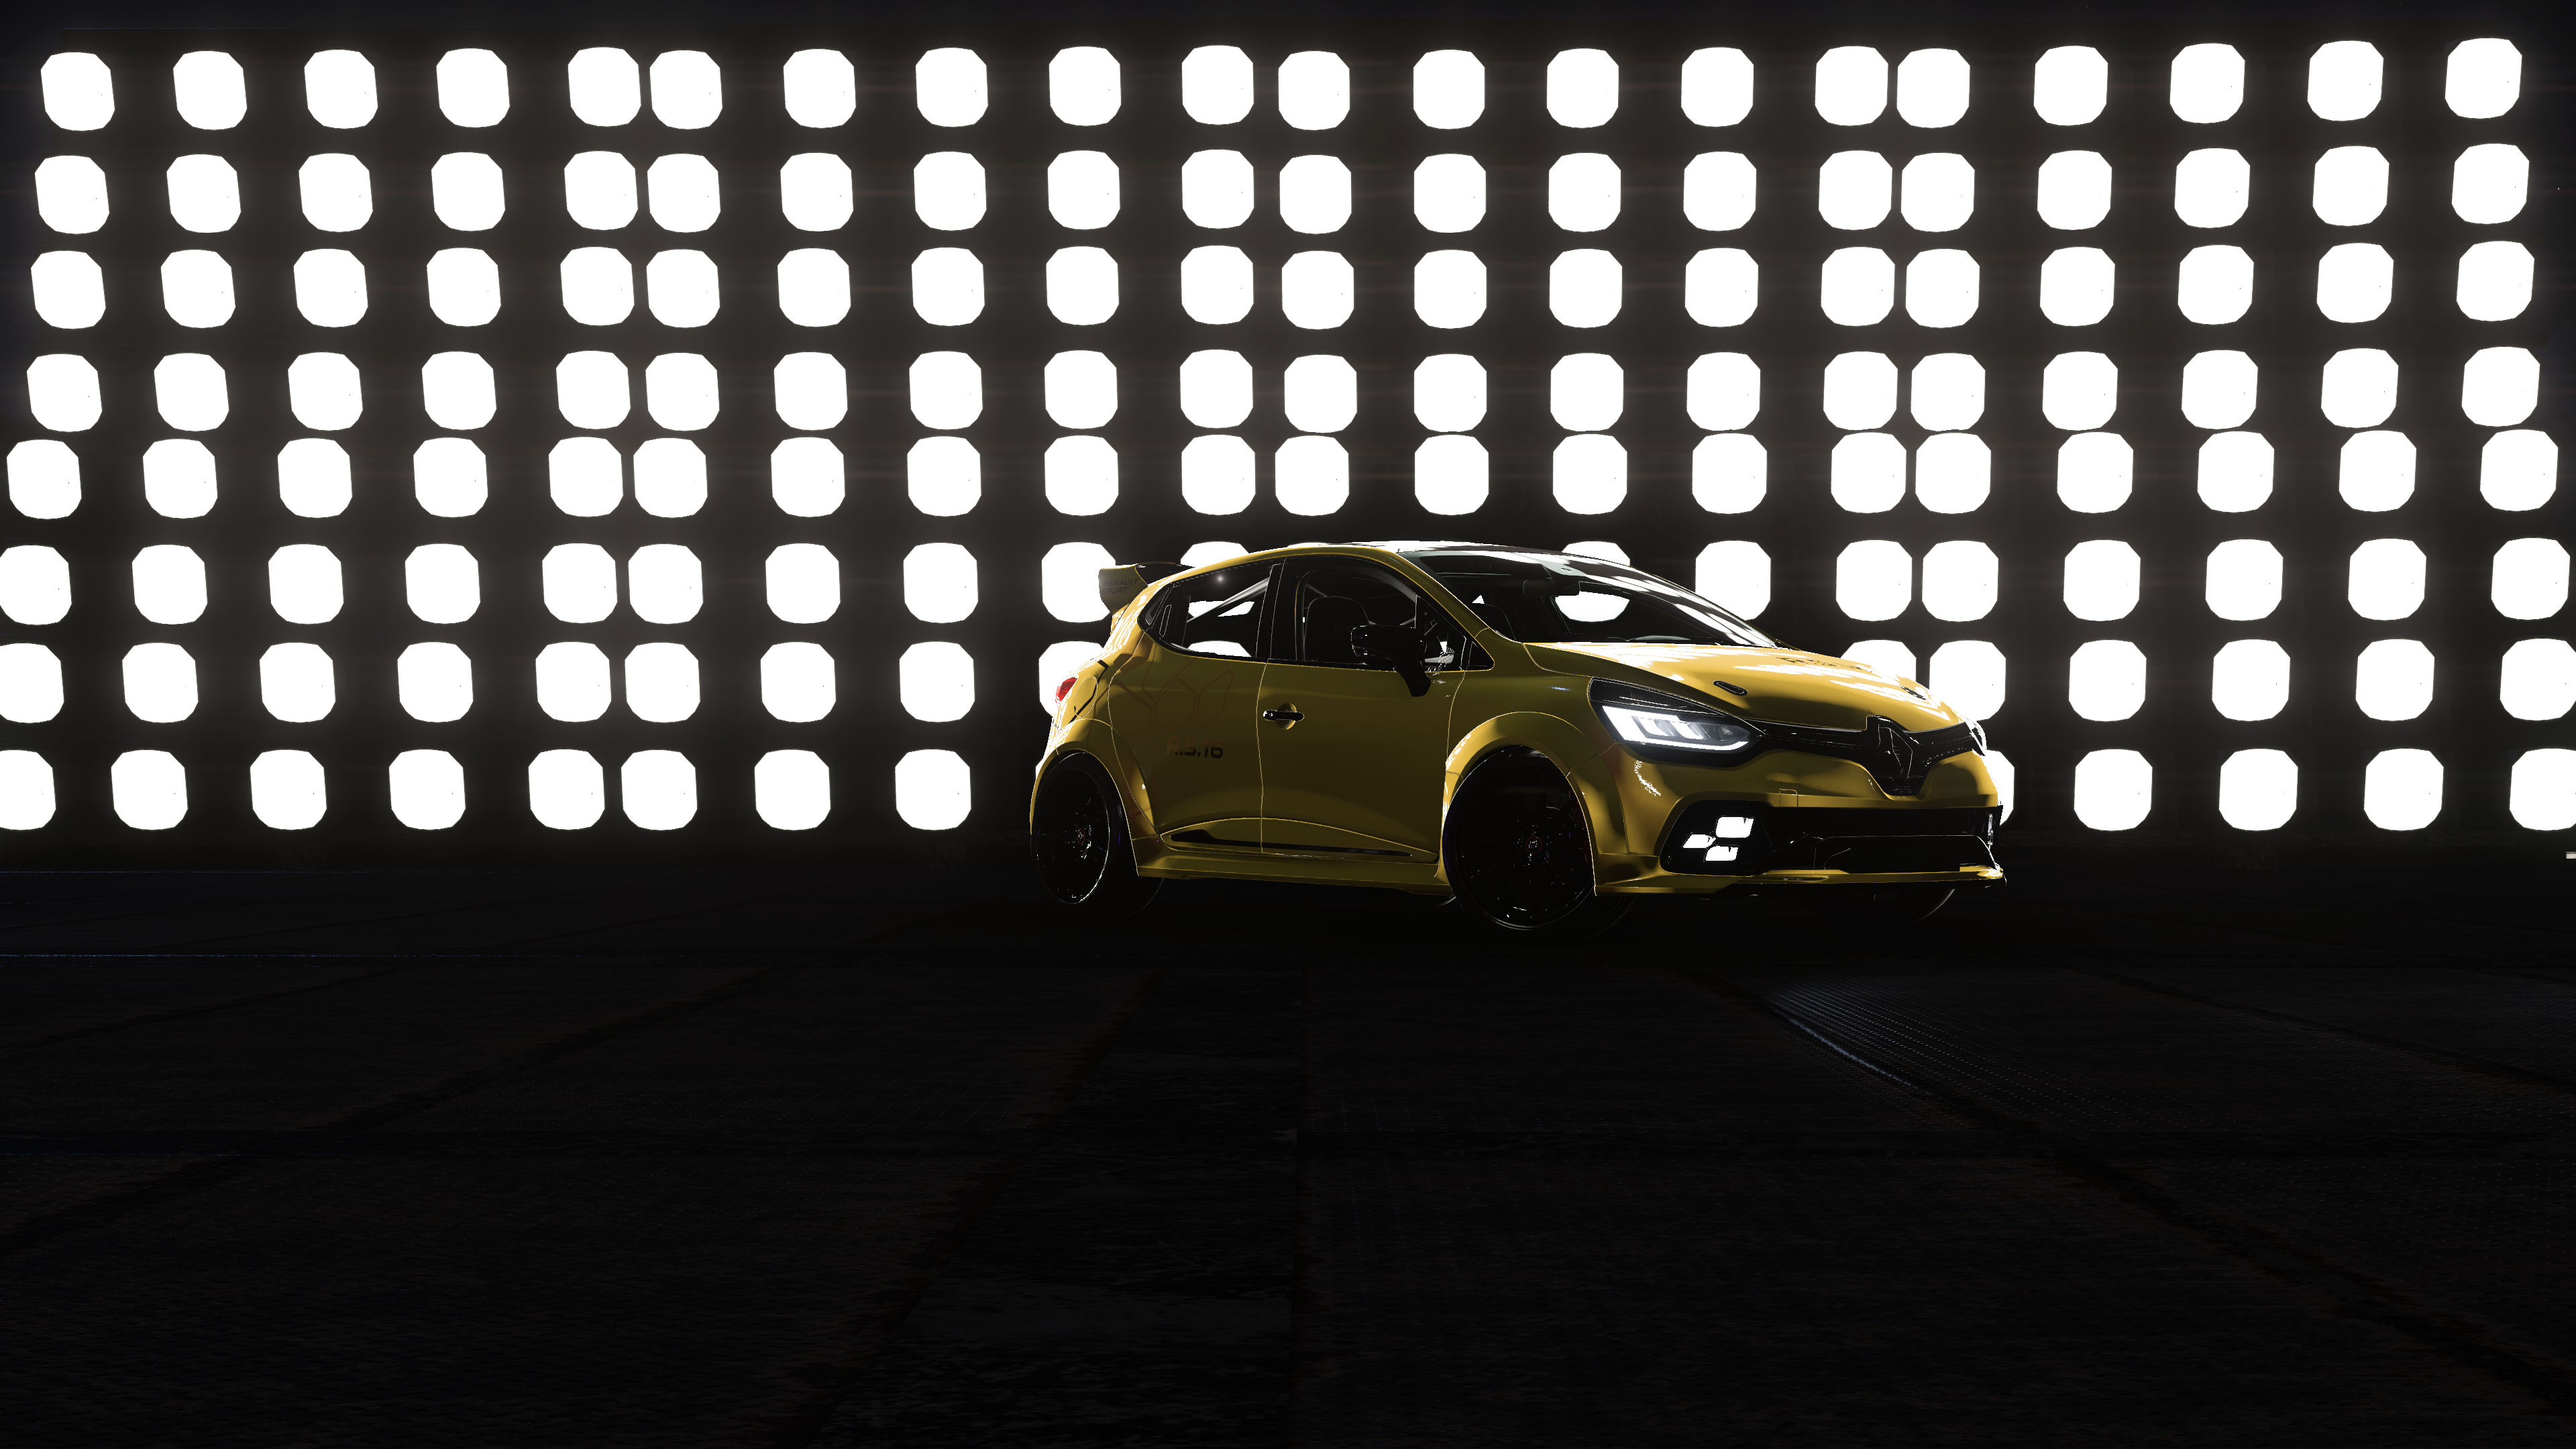 General 3840x2160 Forza Horizon 5 car sports car night Renault Renault Clio hot hatch video games headlights lights CGI French Cars PlaygroundGames